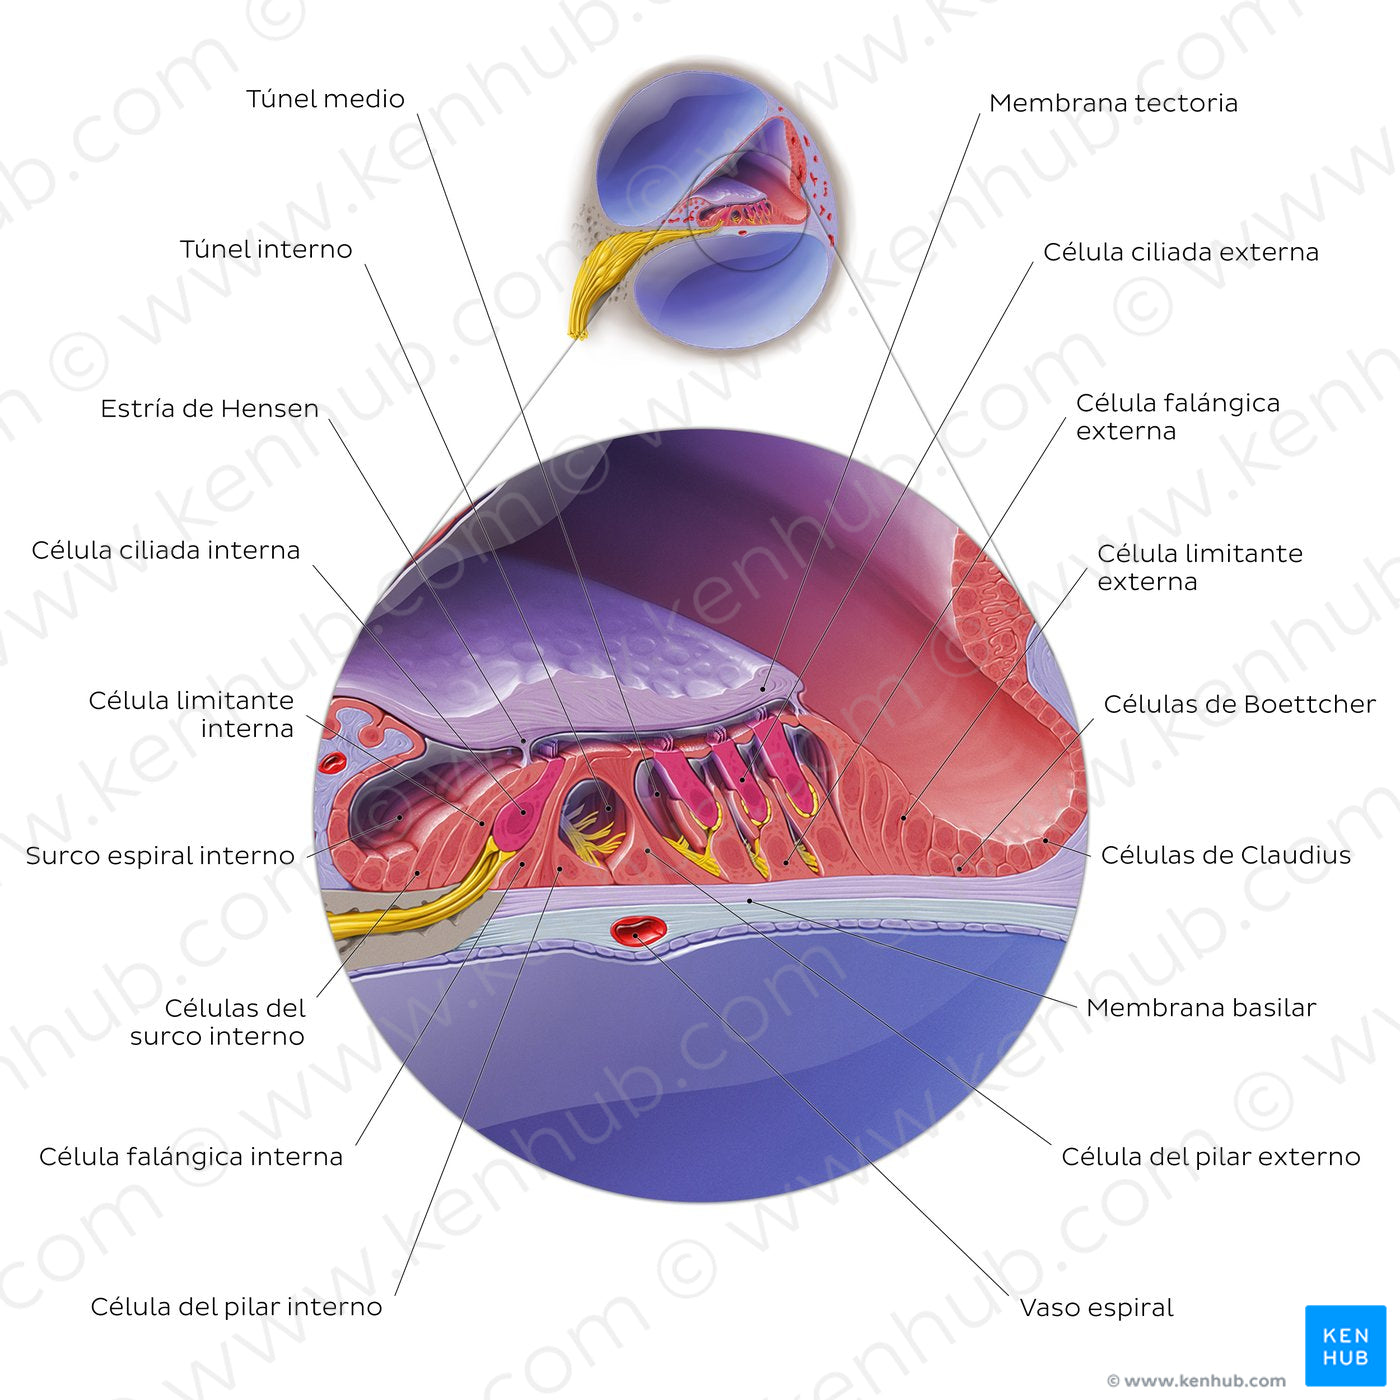 Cochlear duct/spiral organ: cross section (Spanish)